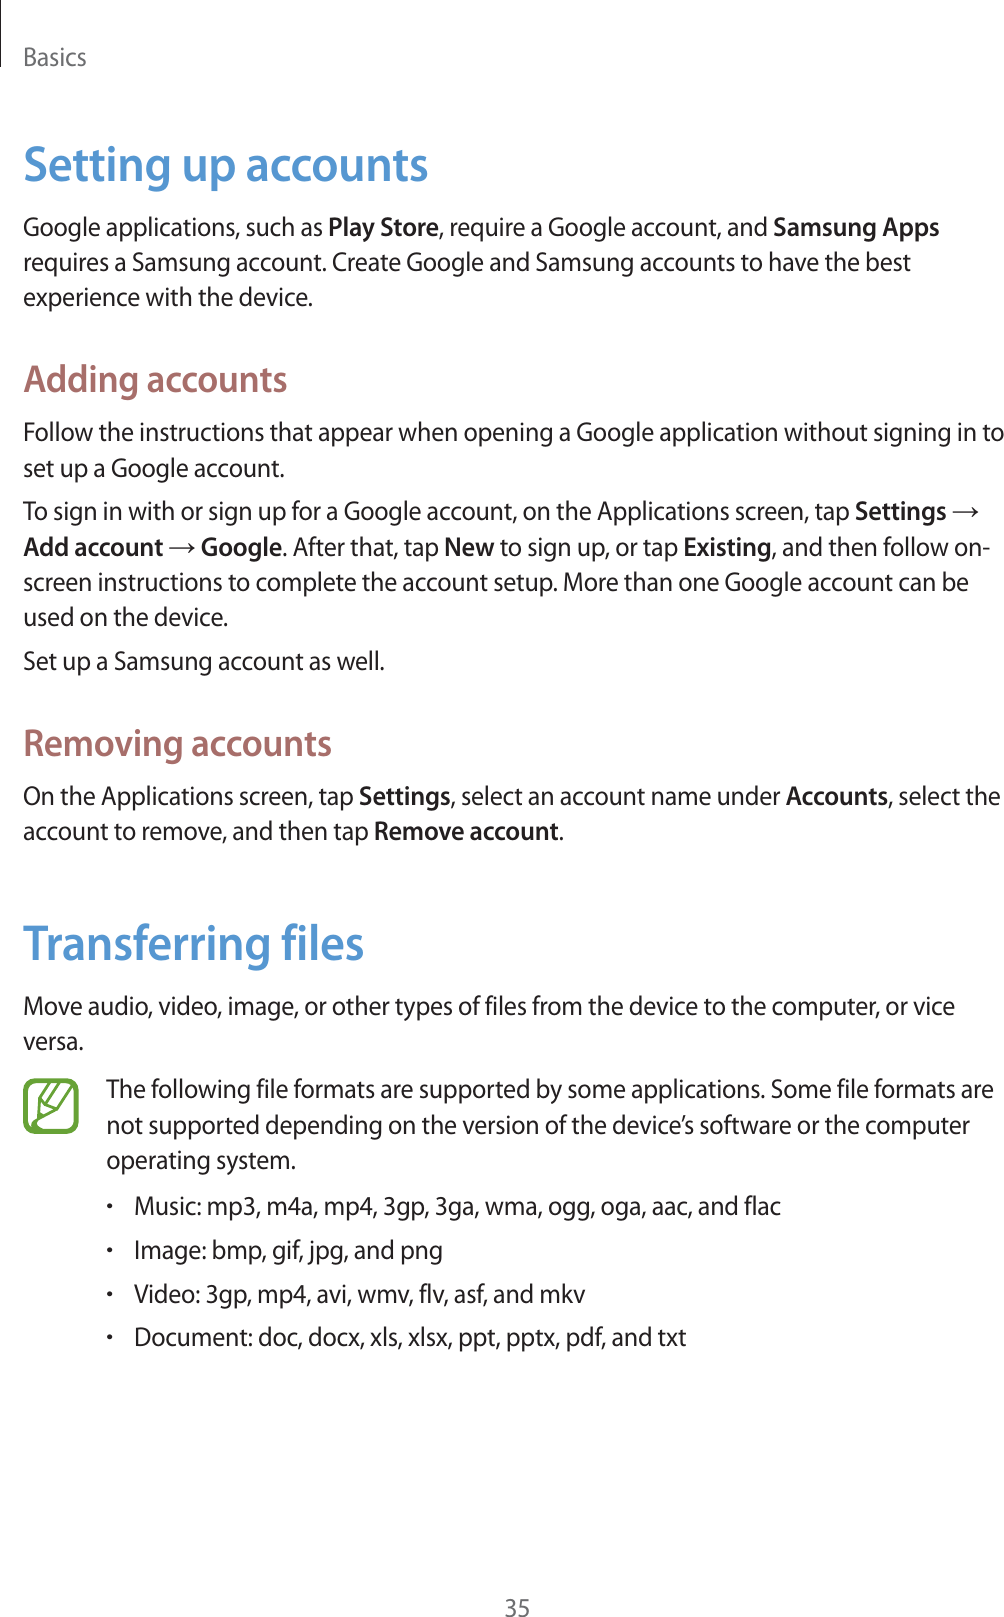 Basics35Setting up accountsGoogle applications, such as Play Store, require a Google account, and Samsung Apps requires a Samsung account. Create Google and Samsung accounts to have the best experience with the device.Adding accountsFollow the instructions that appear when opening a Google application without signing in to set up a Google account.To sign in with or sign up for a Google account, on the Applications screen, tap Settings ĺ Add account ĺ Google. After that, tap New to sign up, or tap Existing, and then follow on-screen instructions to complete the account setup. More than one Google account can be used on the device.Set up a Samsung account as well.Removing accountsOn the Applications screen, tap Settings, select an account name under Accounts, select the account to remove, and then tap Remove account.Transferring filesMove audio, video, image, or other types of files from the device to the computer, or vice versa.The following file formats are supported by some applications. Some file formats are not supported depending on the version of the device’s software or the computer operating system.rMusic: mp3, m4a, mp4, 3gp, 3ga, wma, ogg, oga, aac, and flacrImage: bmp, gif, jpg, and pngrVideo: 3gp, mp4, avi, wmv, flv, asf, and mkvrDocument: doc, docx, xls, xlsx, ppt, pptx, pdf, and txt